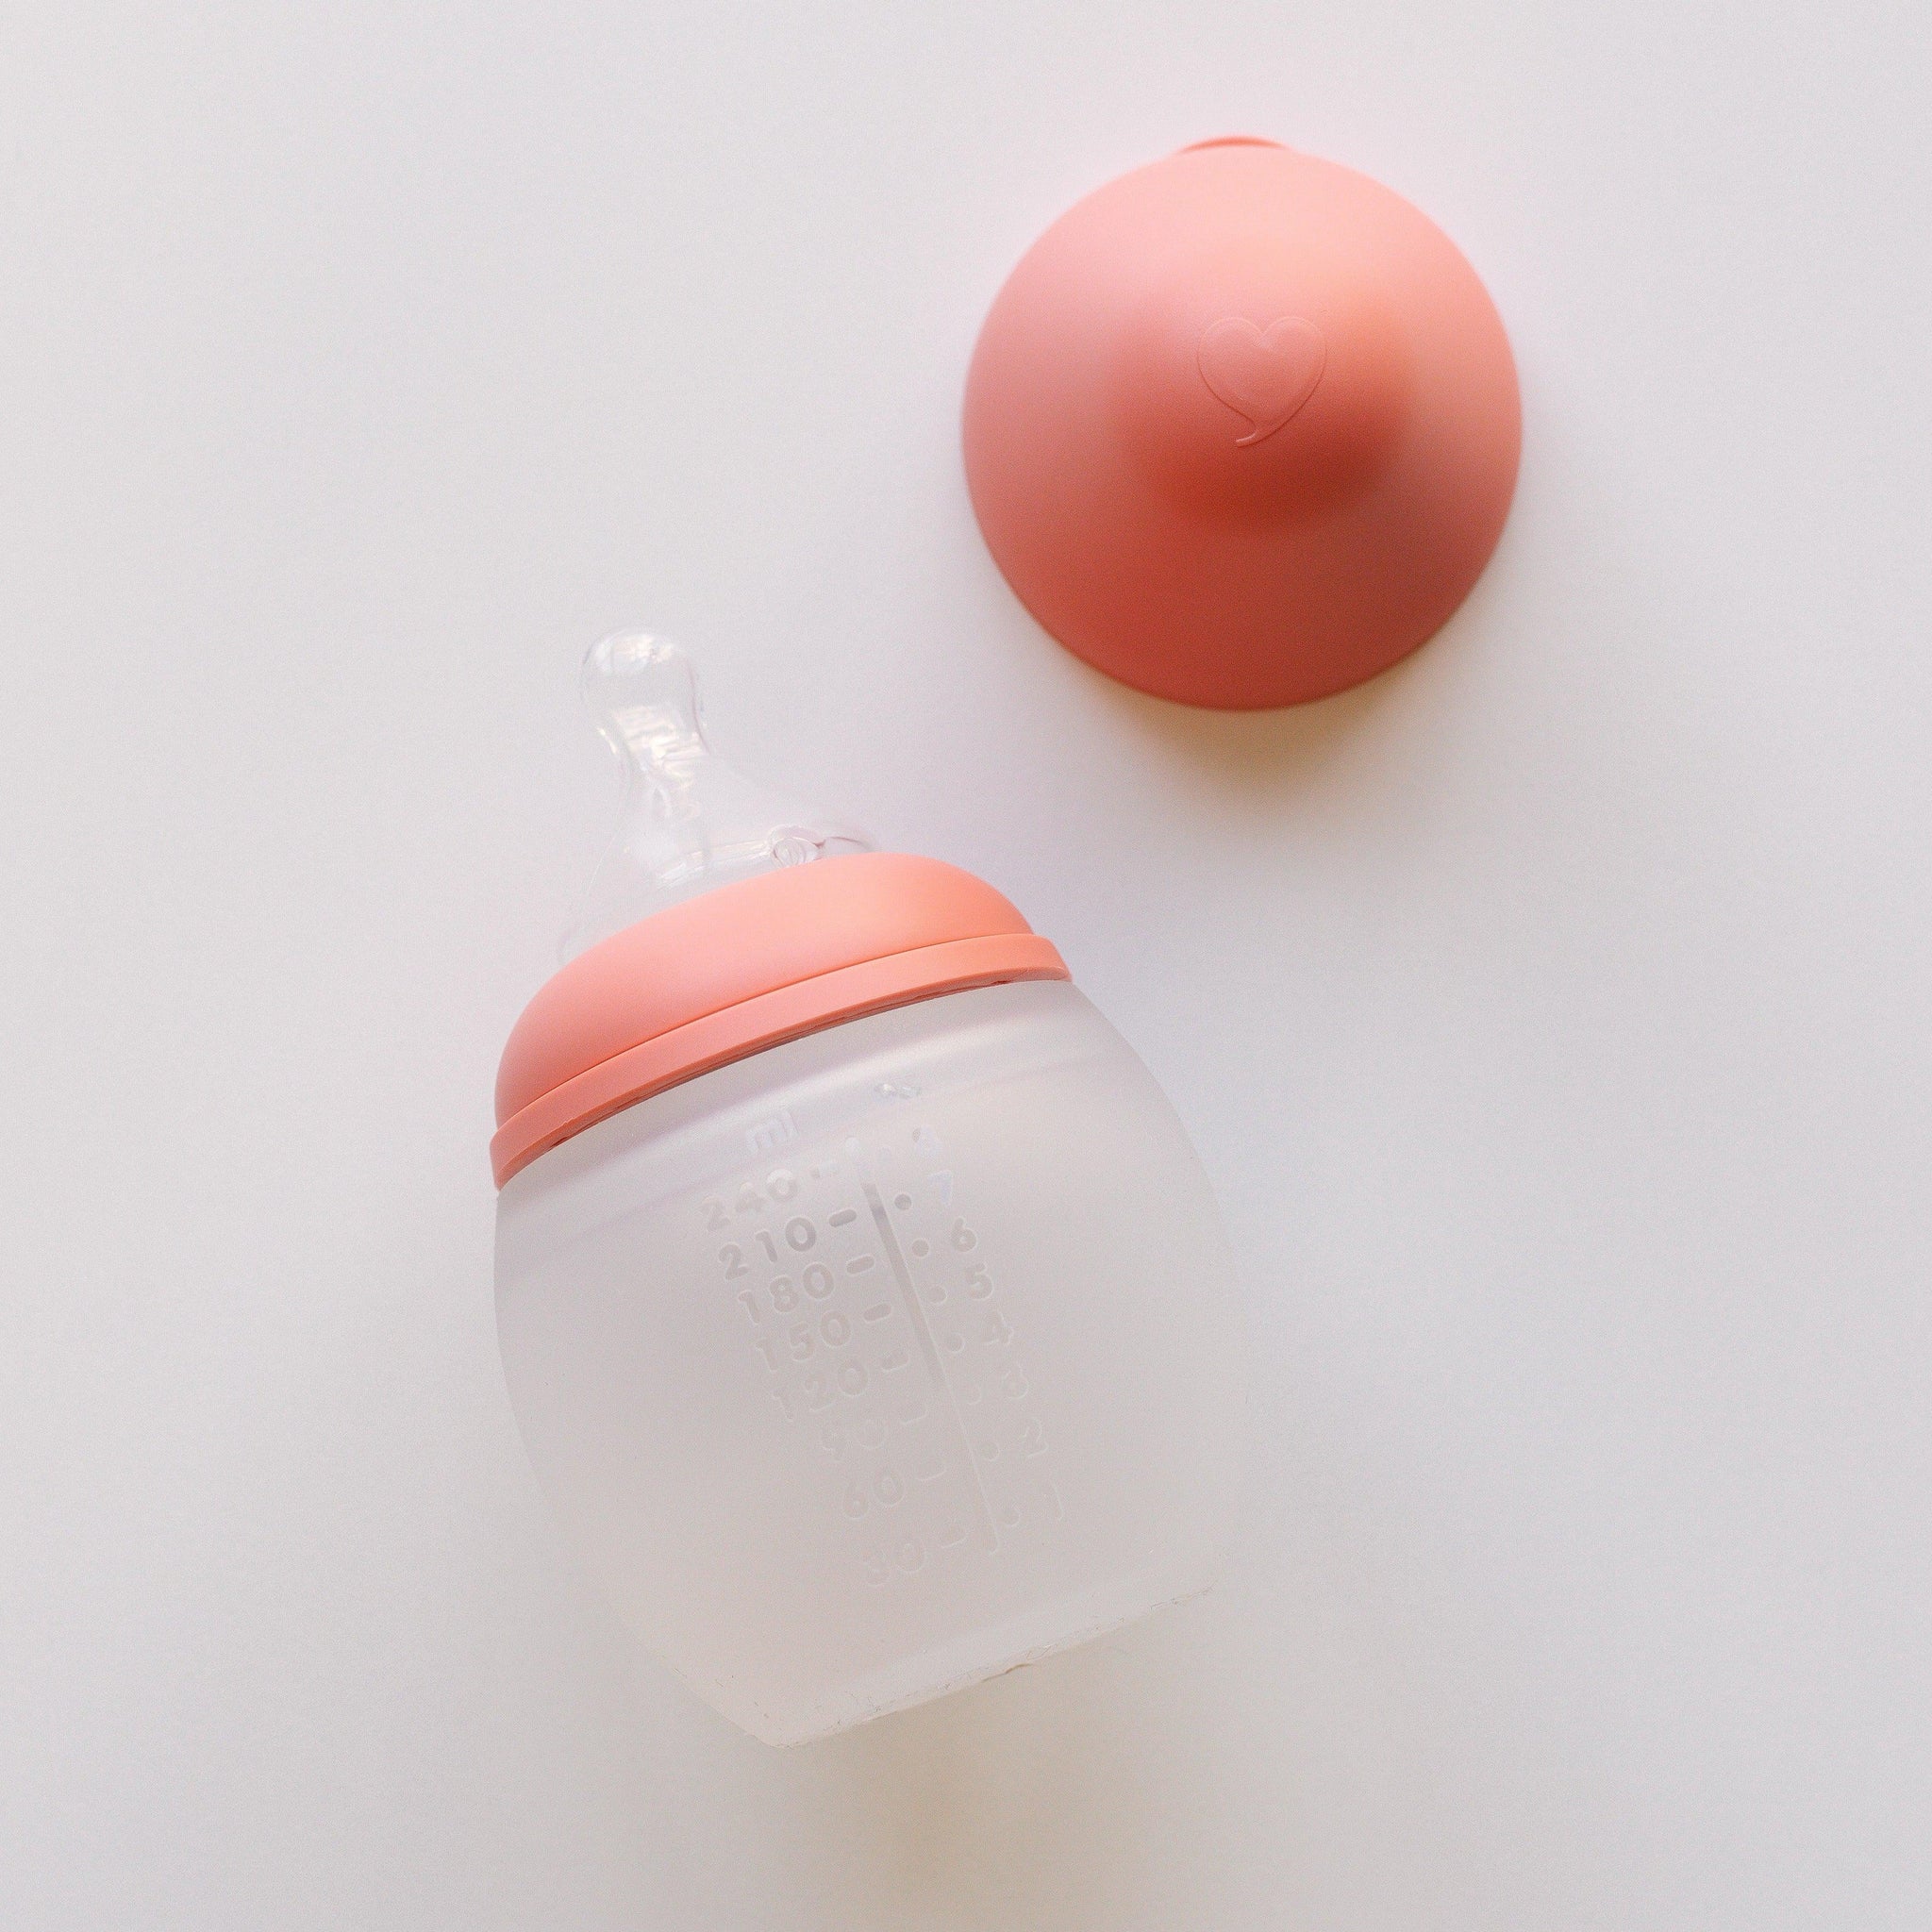 BibRond Élhée is made of pure silicone, of new generation medical quality, and doesn’t contain bisphenol A (BPA), bisphenol S (BPS) or any other substance likely to harm the health of babies.